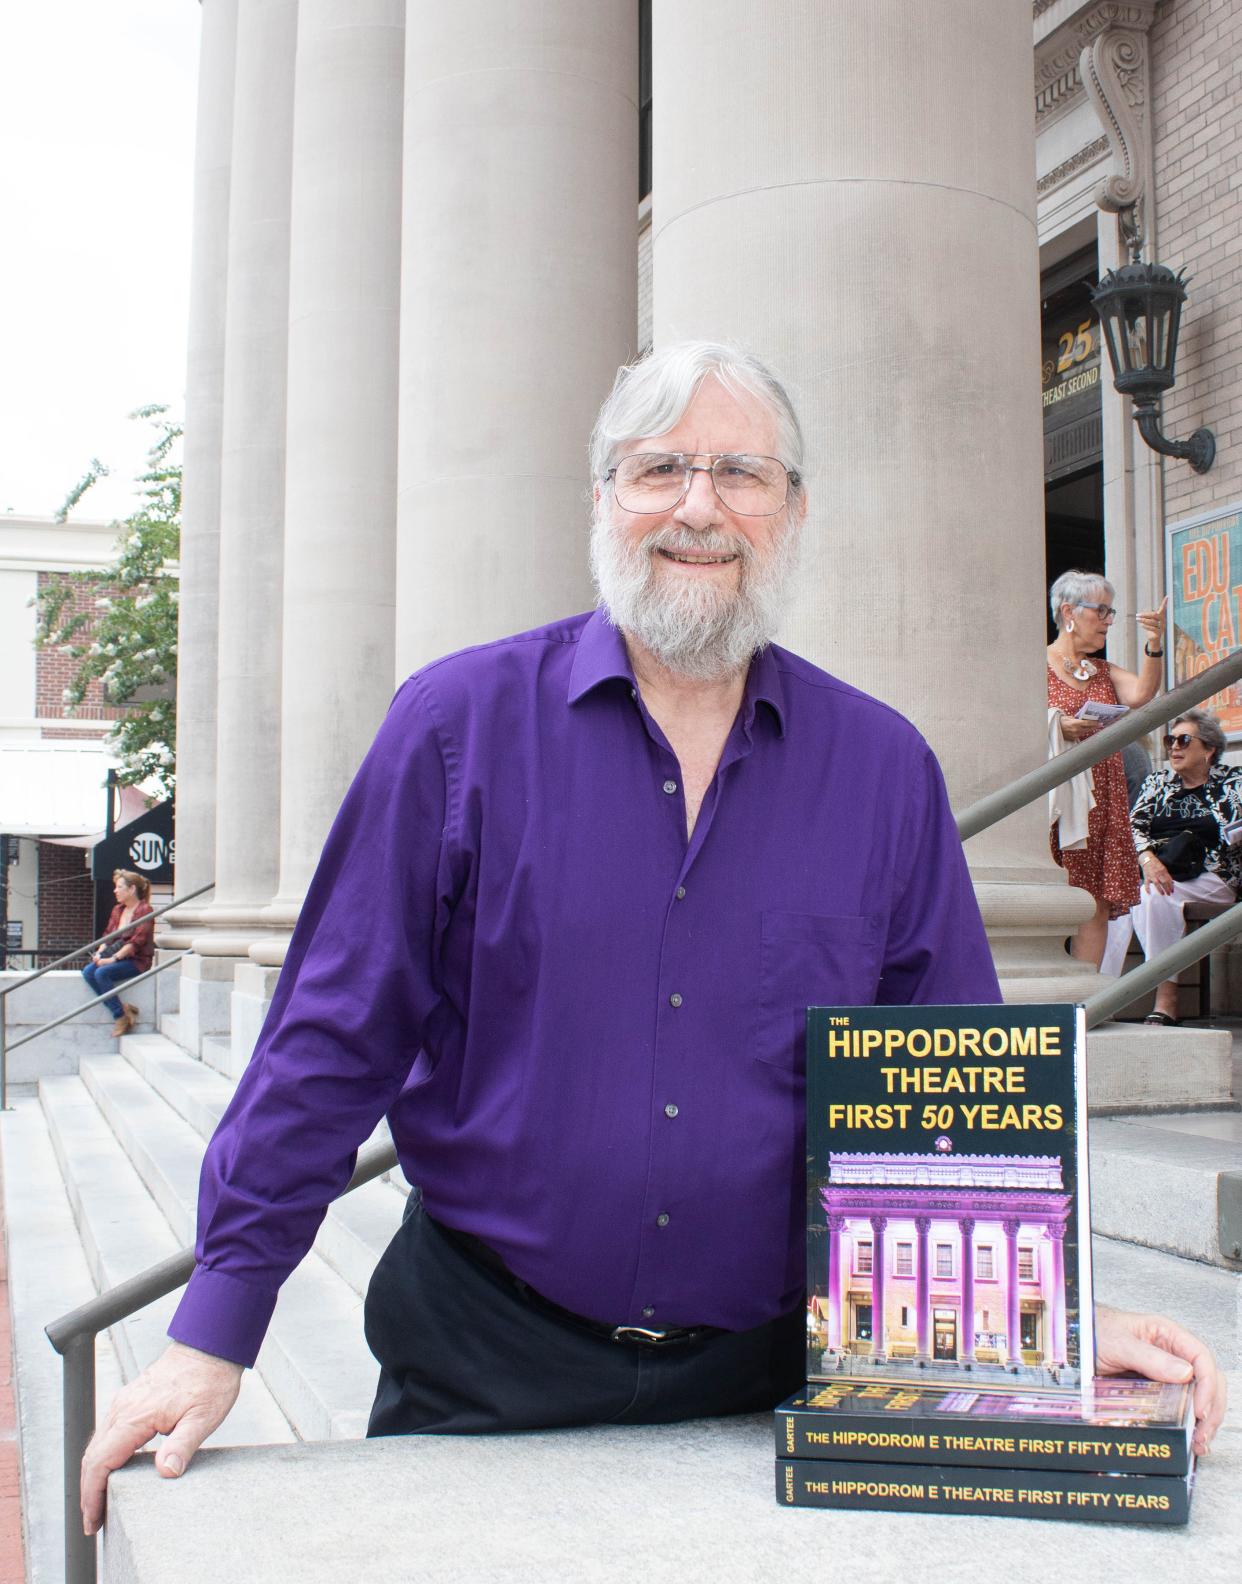 Award-winning author Richard Gartee will discuss his book “The Hippodrome Theatre First Fifty Years" at 4 p.m. July 8 at the Matheson History Museum.